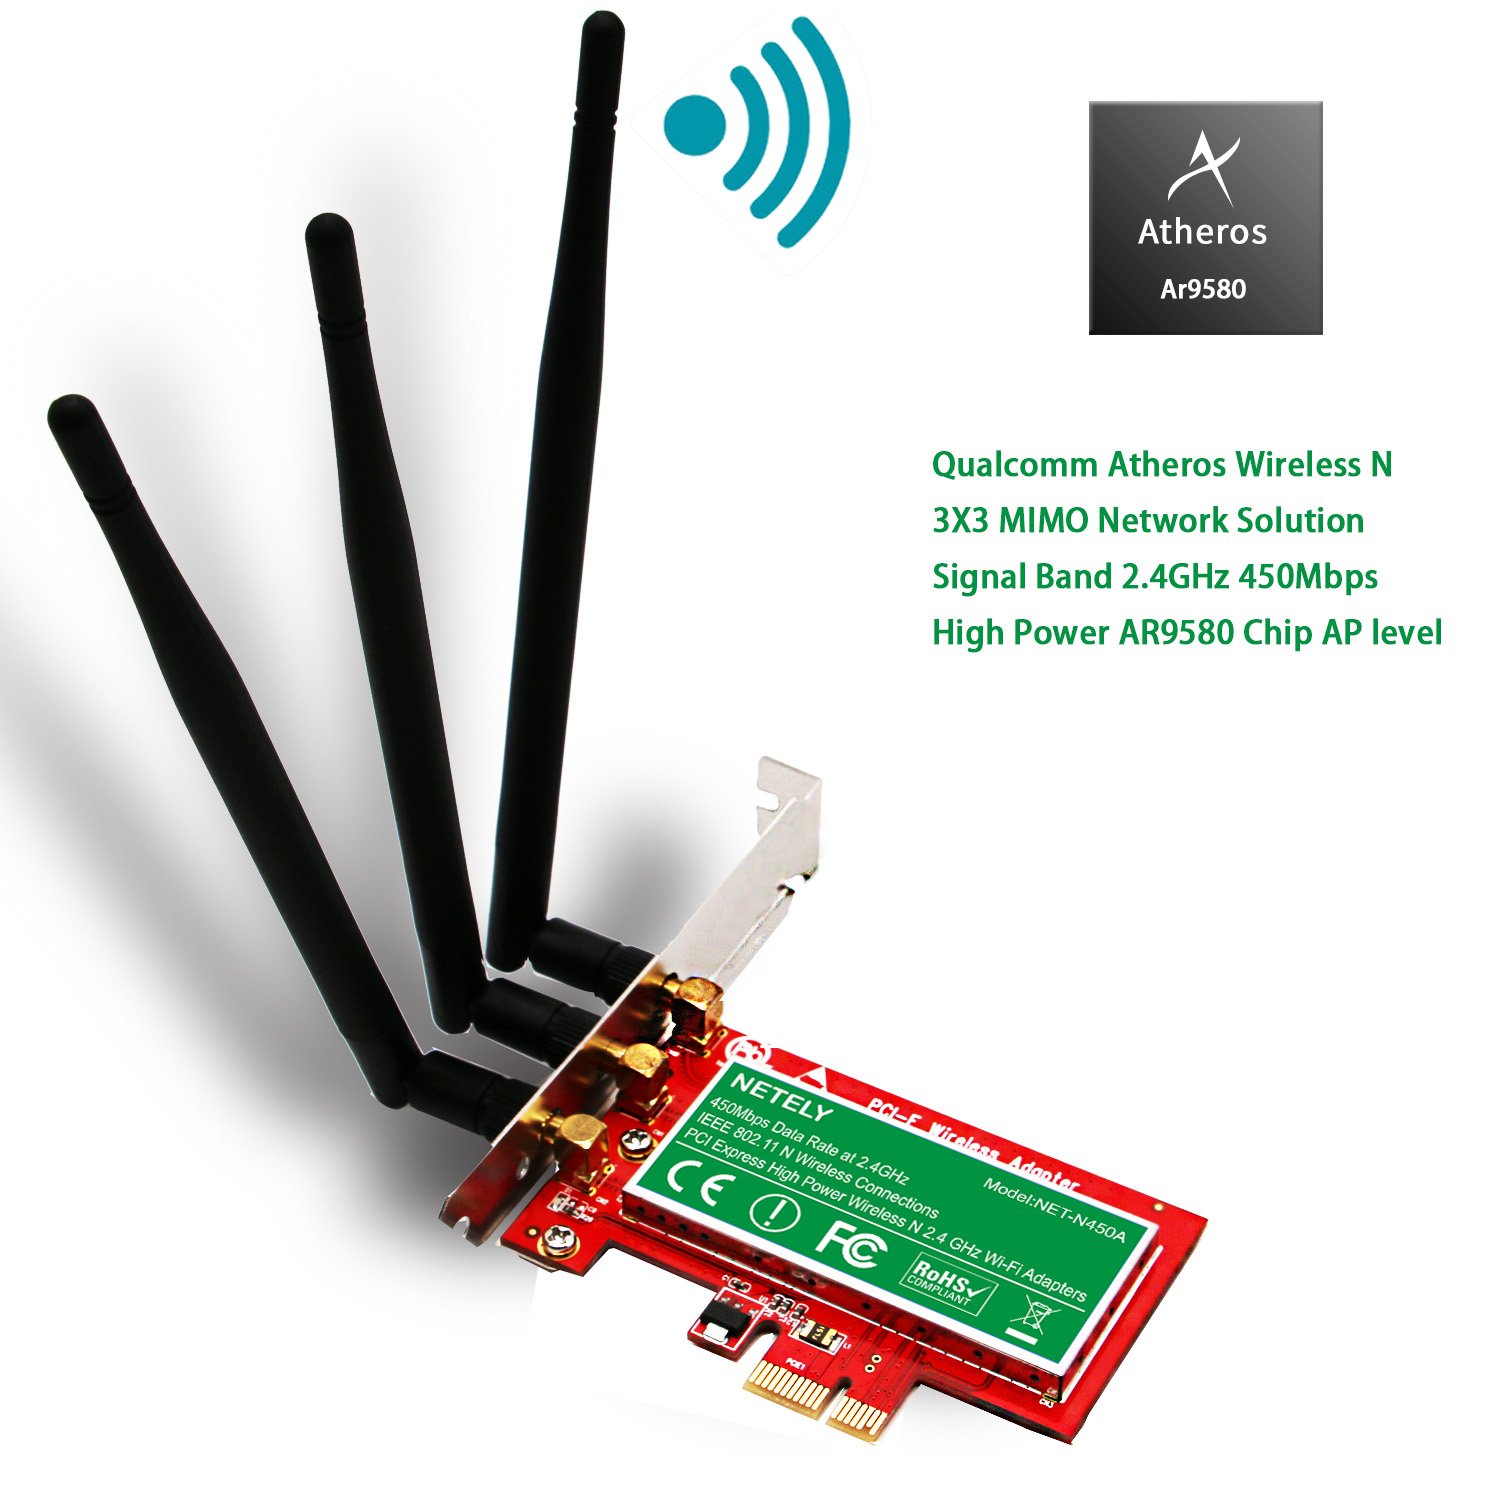 Atheros ar9485 wireless network adapter driver 10.0.0.345